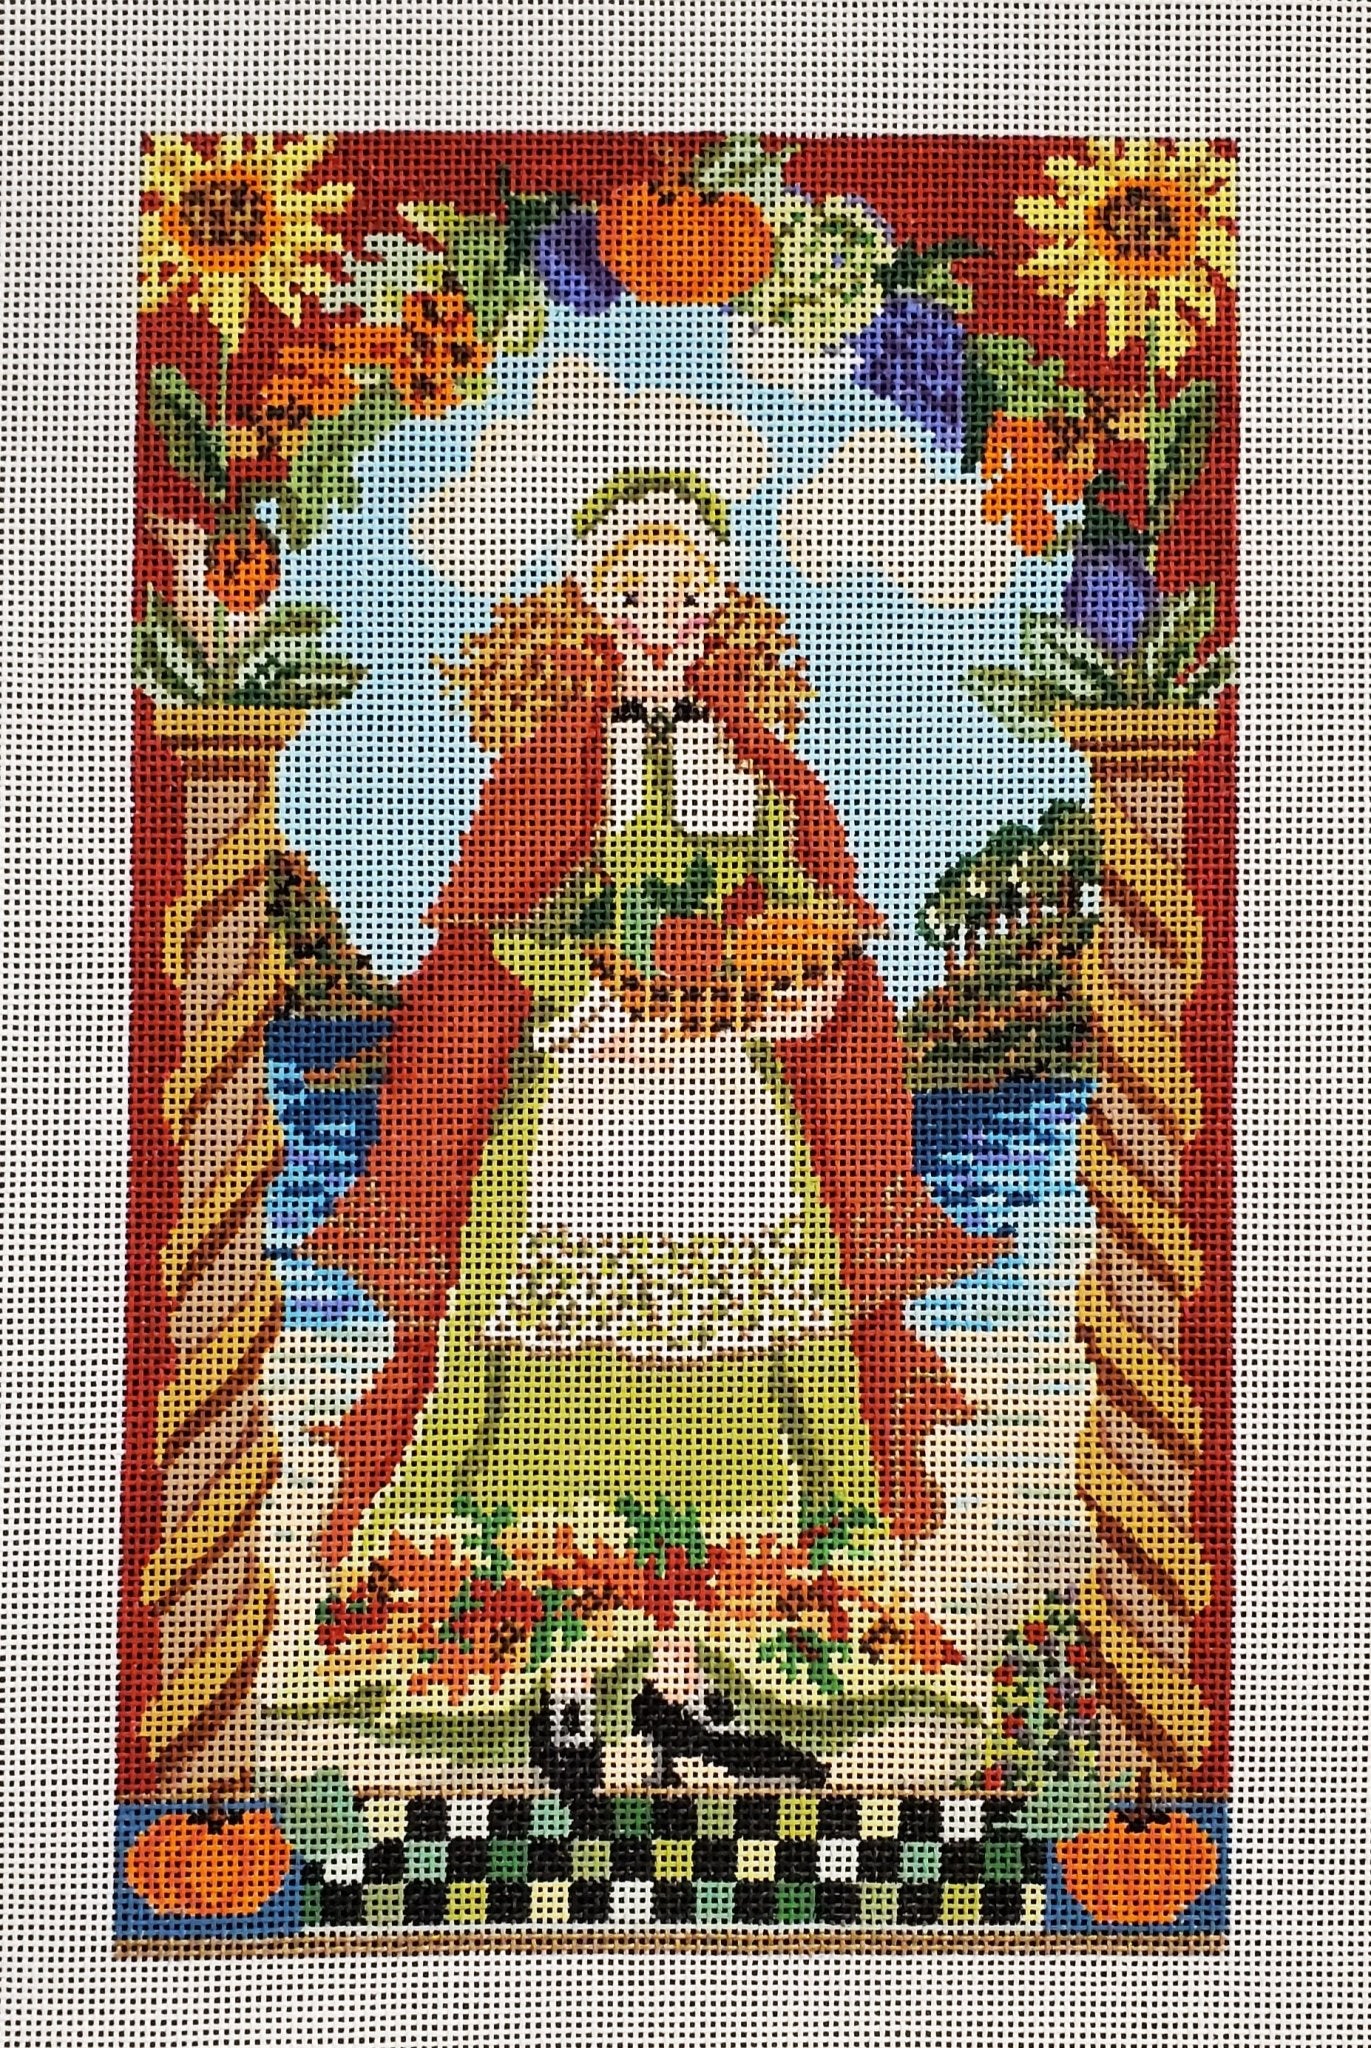 Pilgrim Woman w / Stitch Guide - The Flying Needles